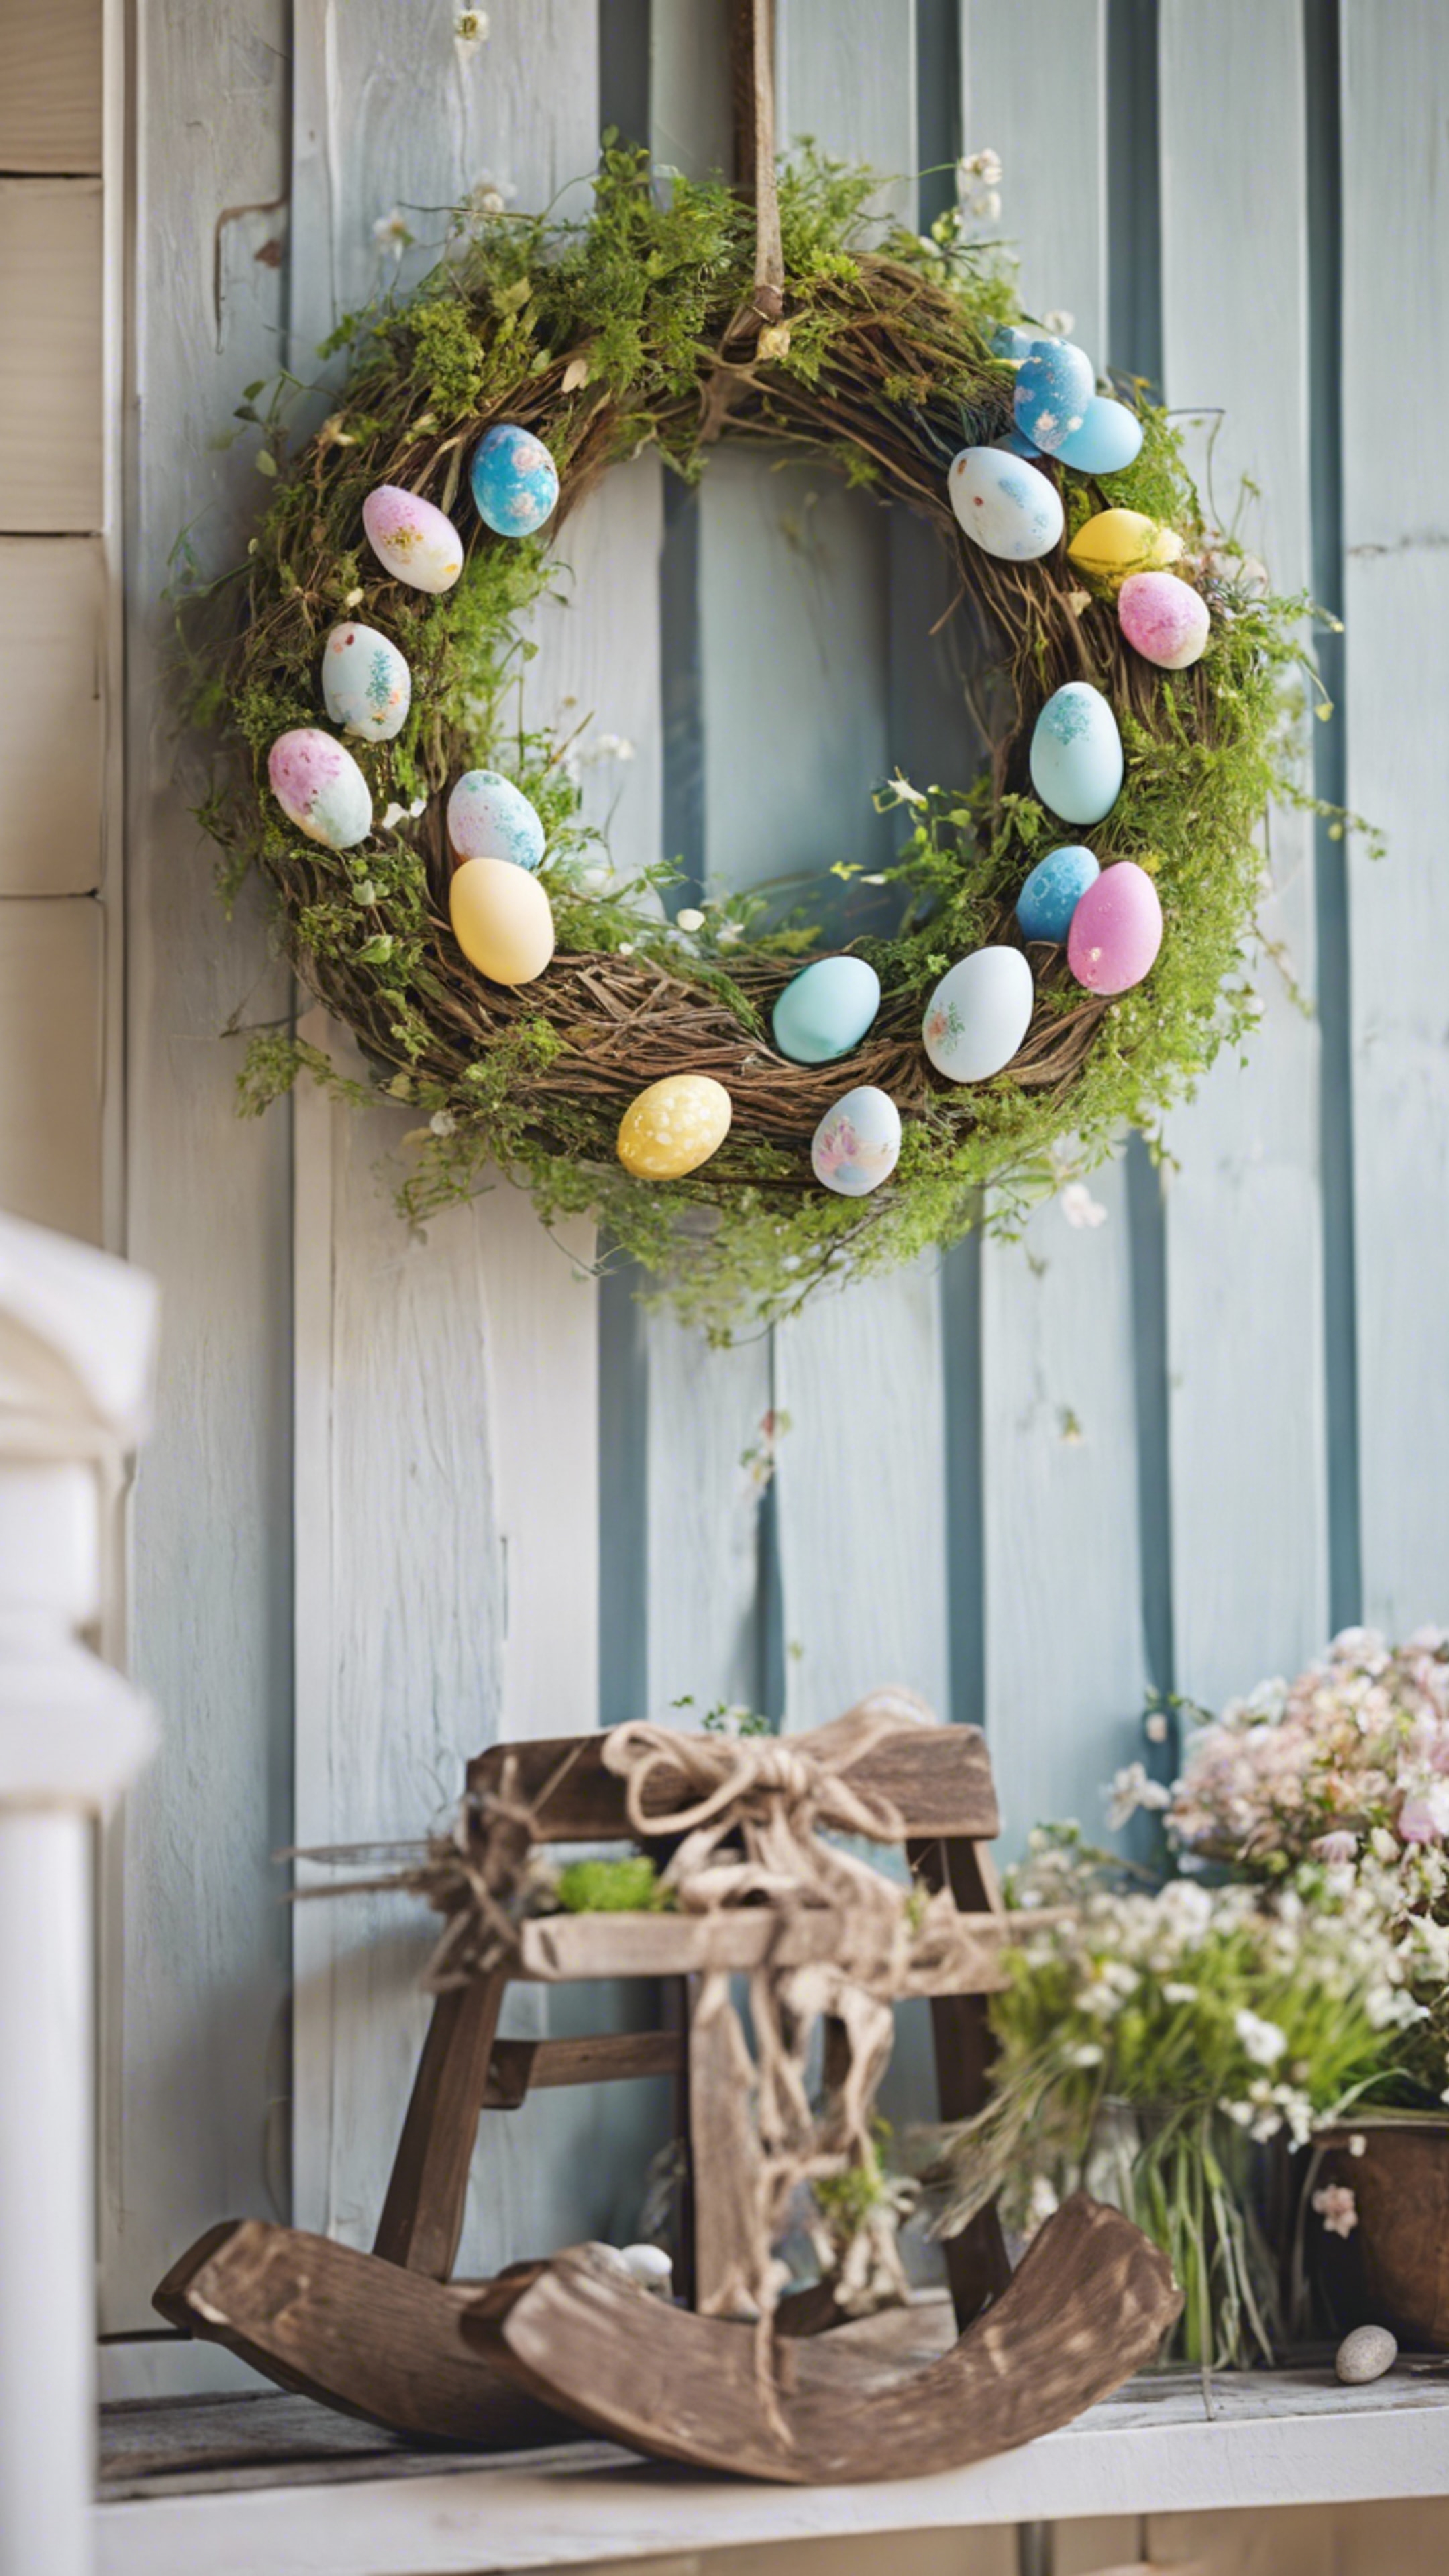 Country-style Easter decorative wreath hanging on a front porch, inviting the spring spirits. Обои[efa72fd9539f4de39955]